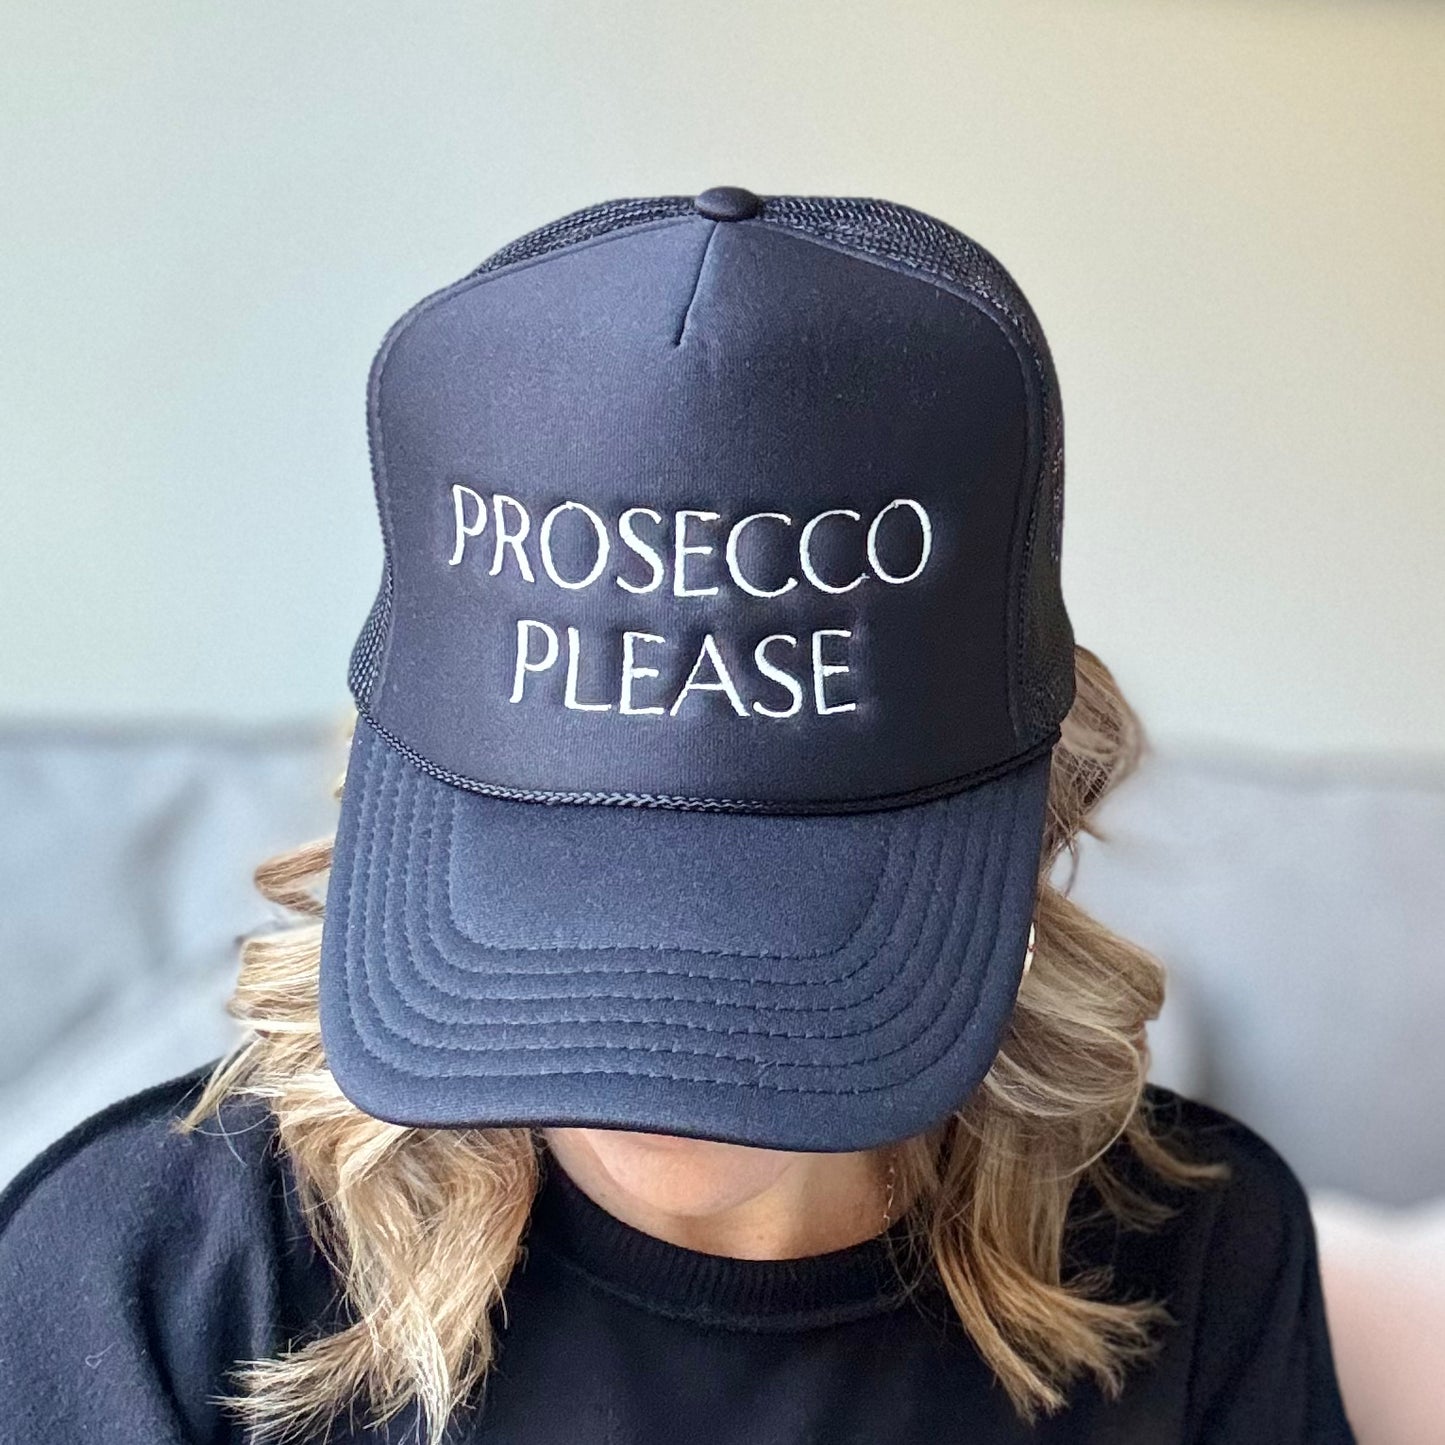 Black Prosecco Please Embroidered Mid Profile Trucker Hat great gift for girls trip or bachelorette party